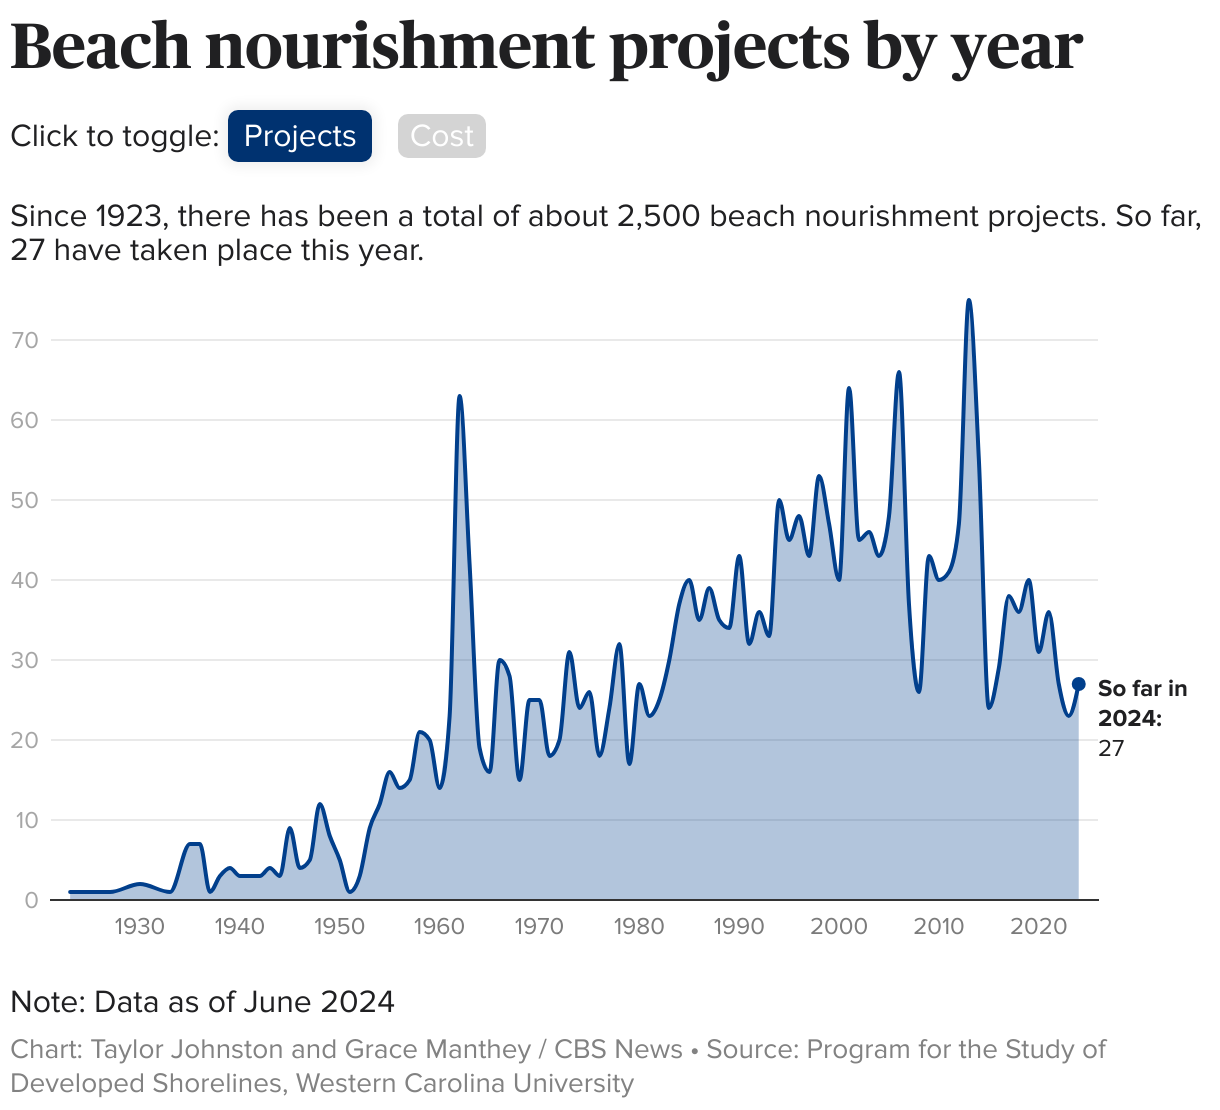 Line chart showing the number of beach nourishment projects by year, dating back to 1923.